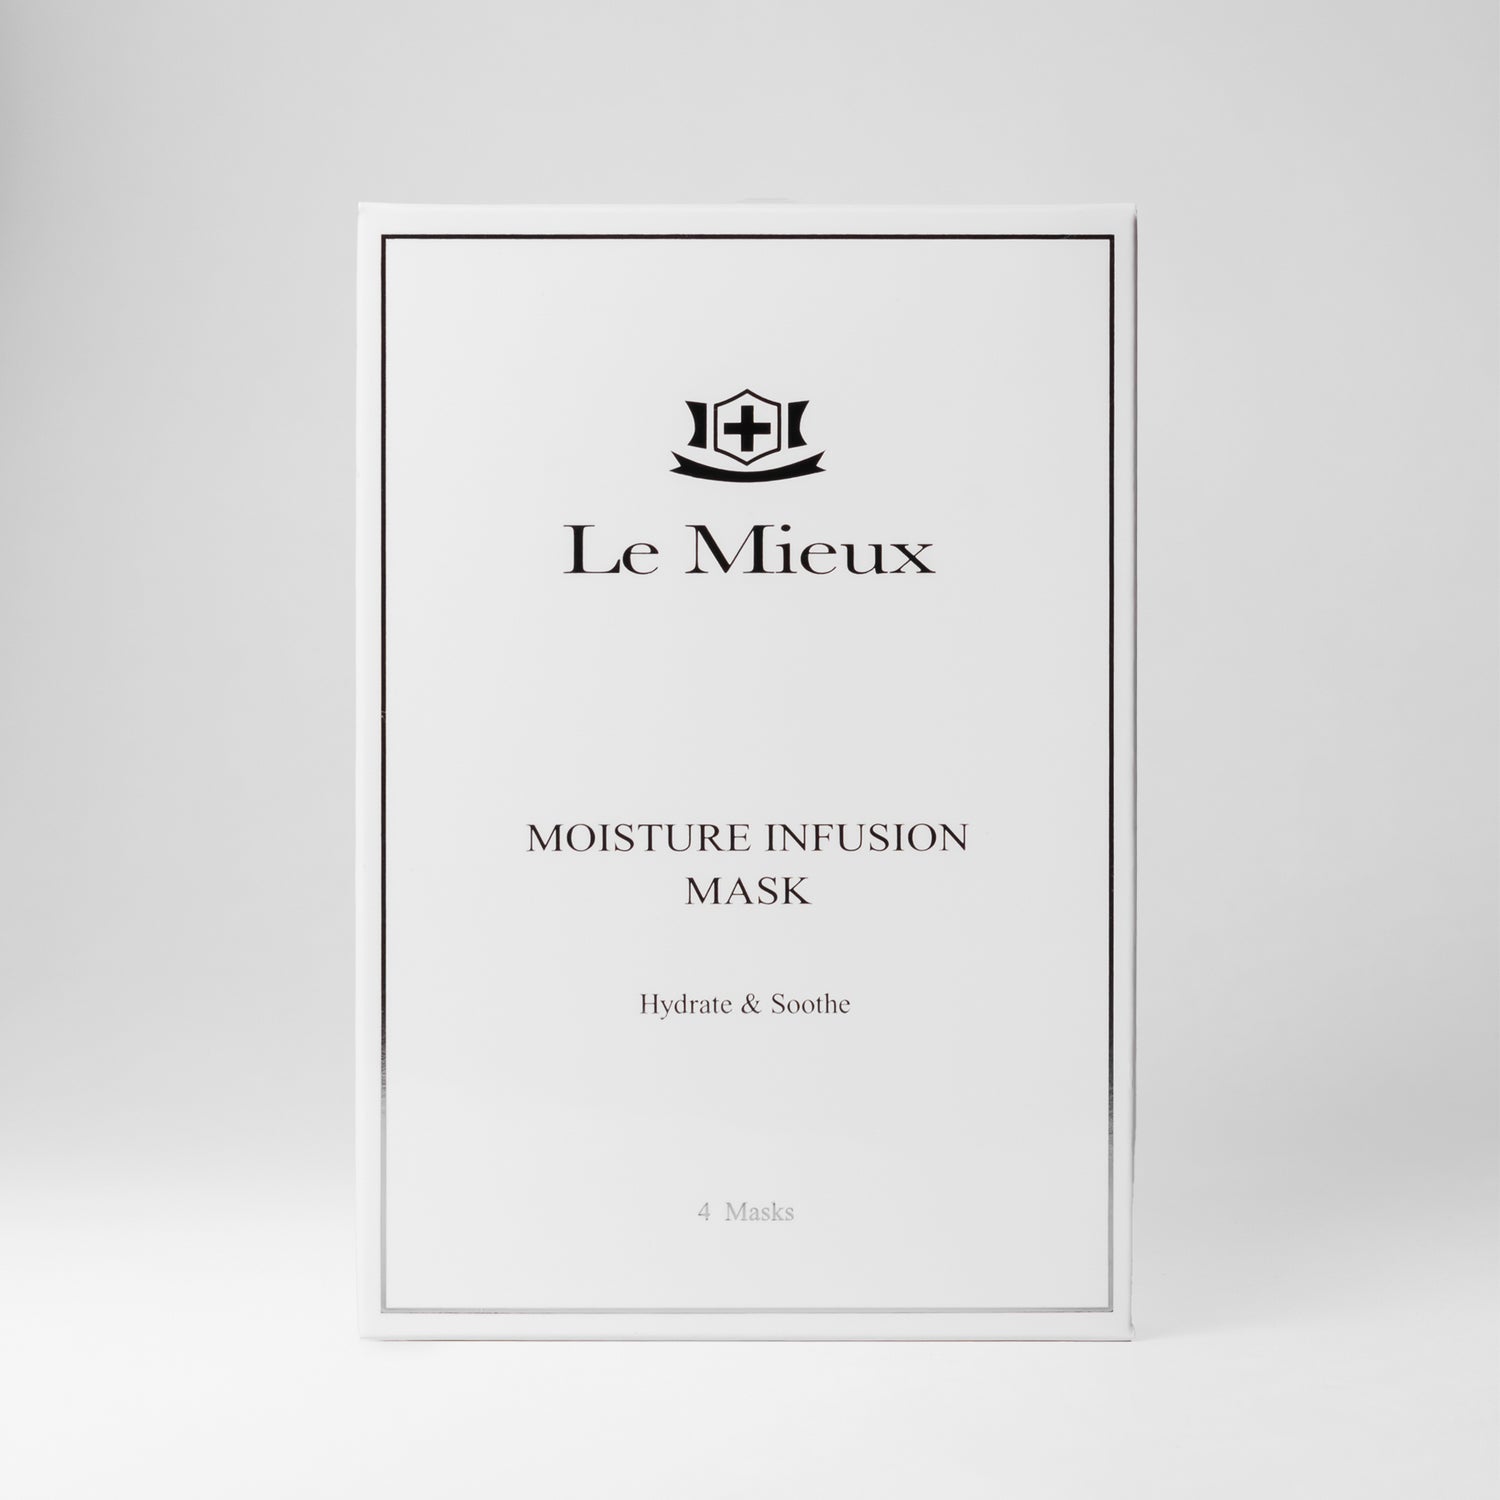  MOISTURE INFUSION MASK from Le Mieux Skincare - 2